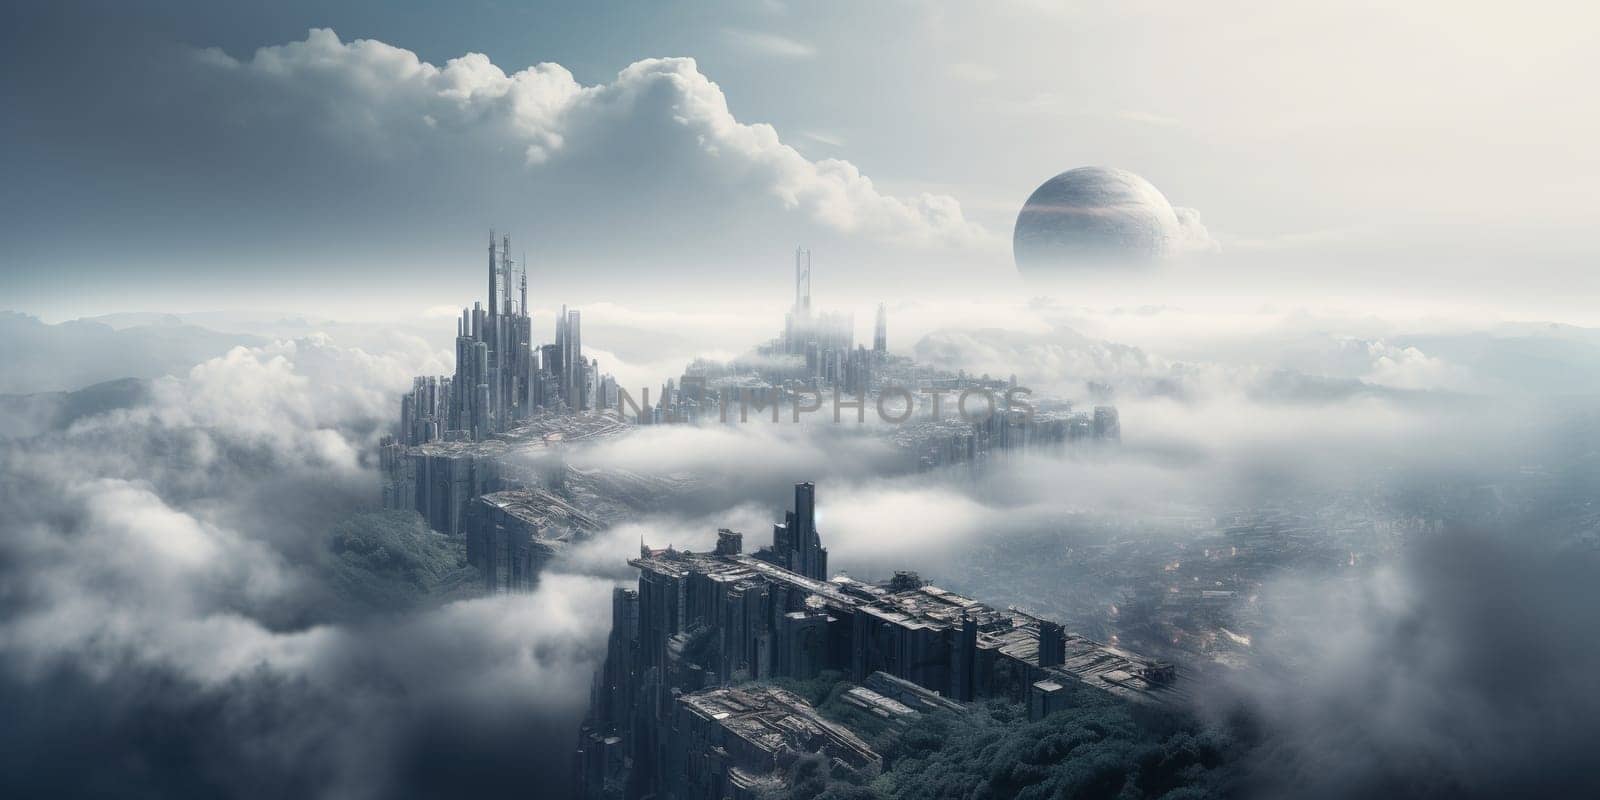 "Futuristic Megacity with Tall Skyscrapers on a Mountain." by tan4ikk1